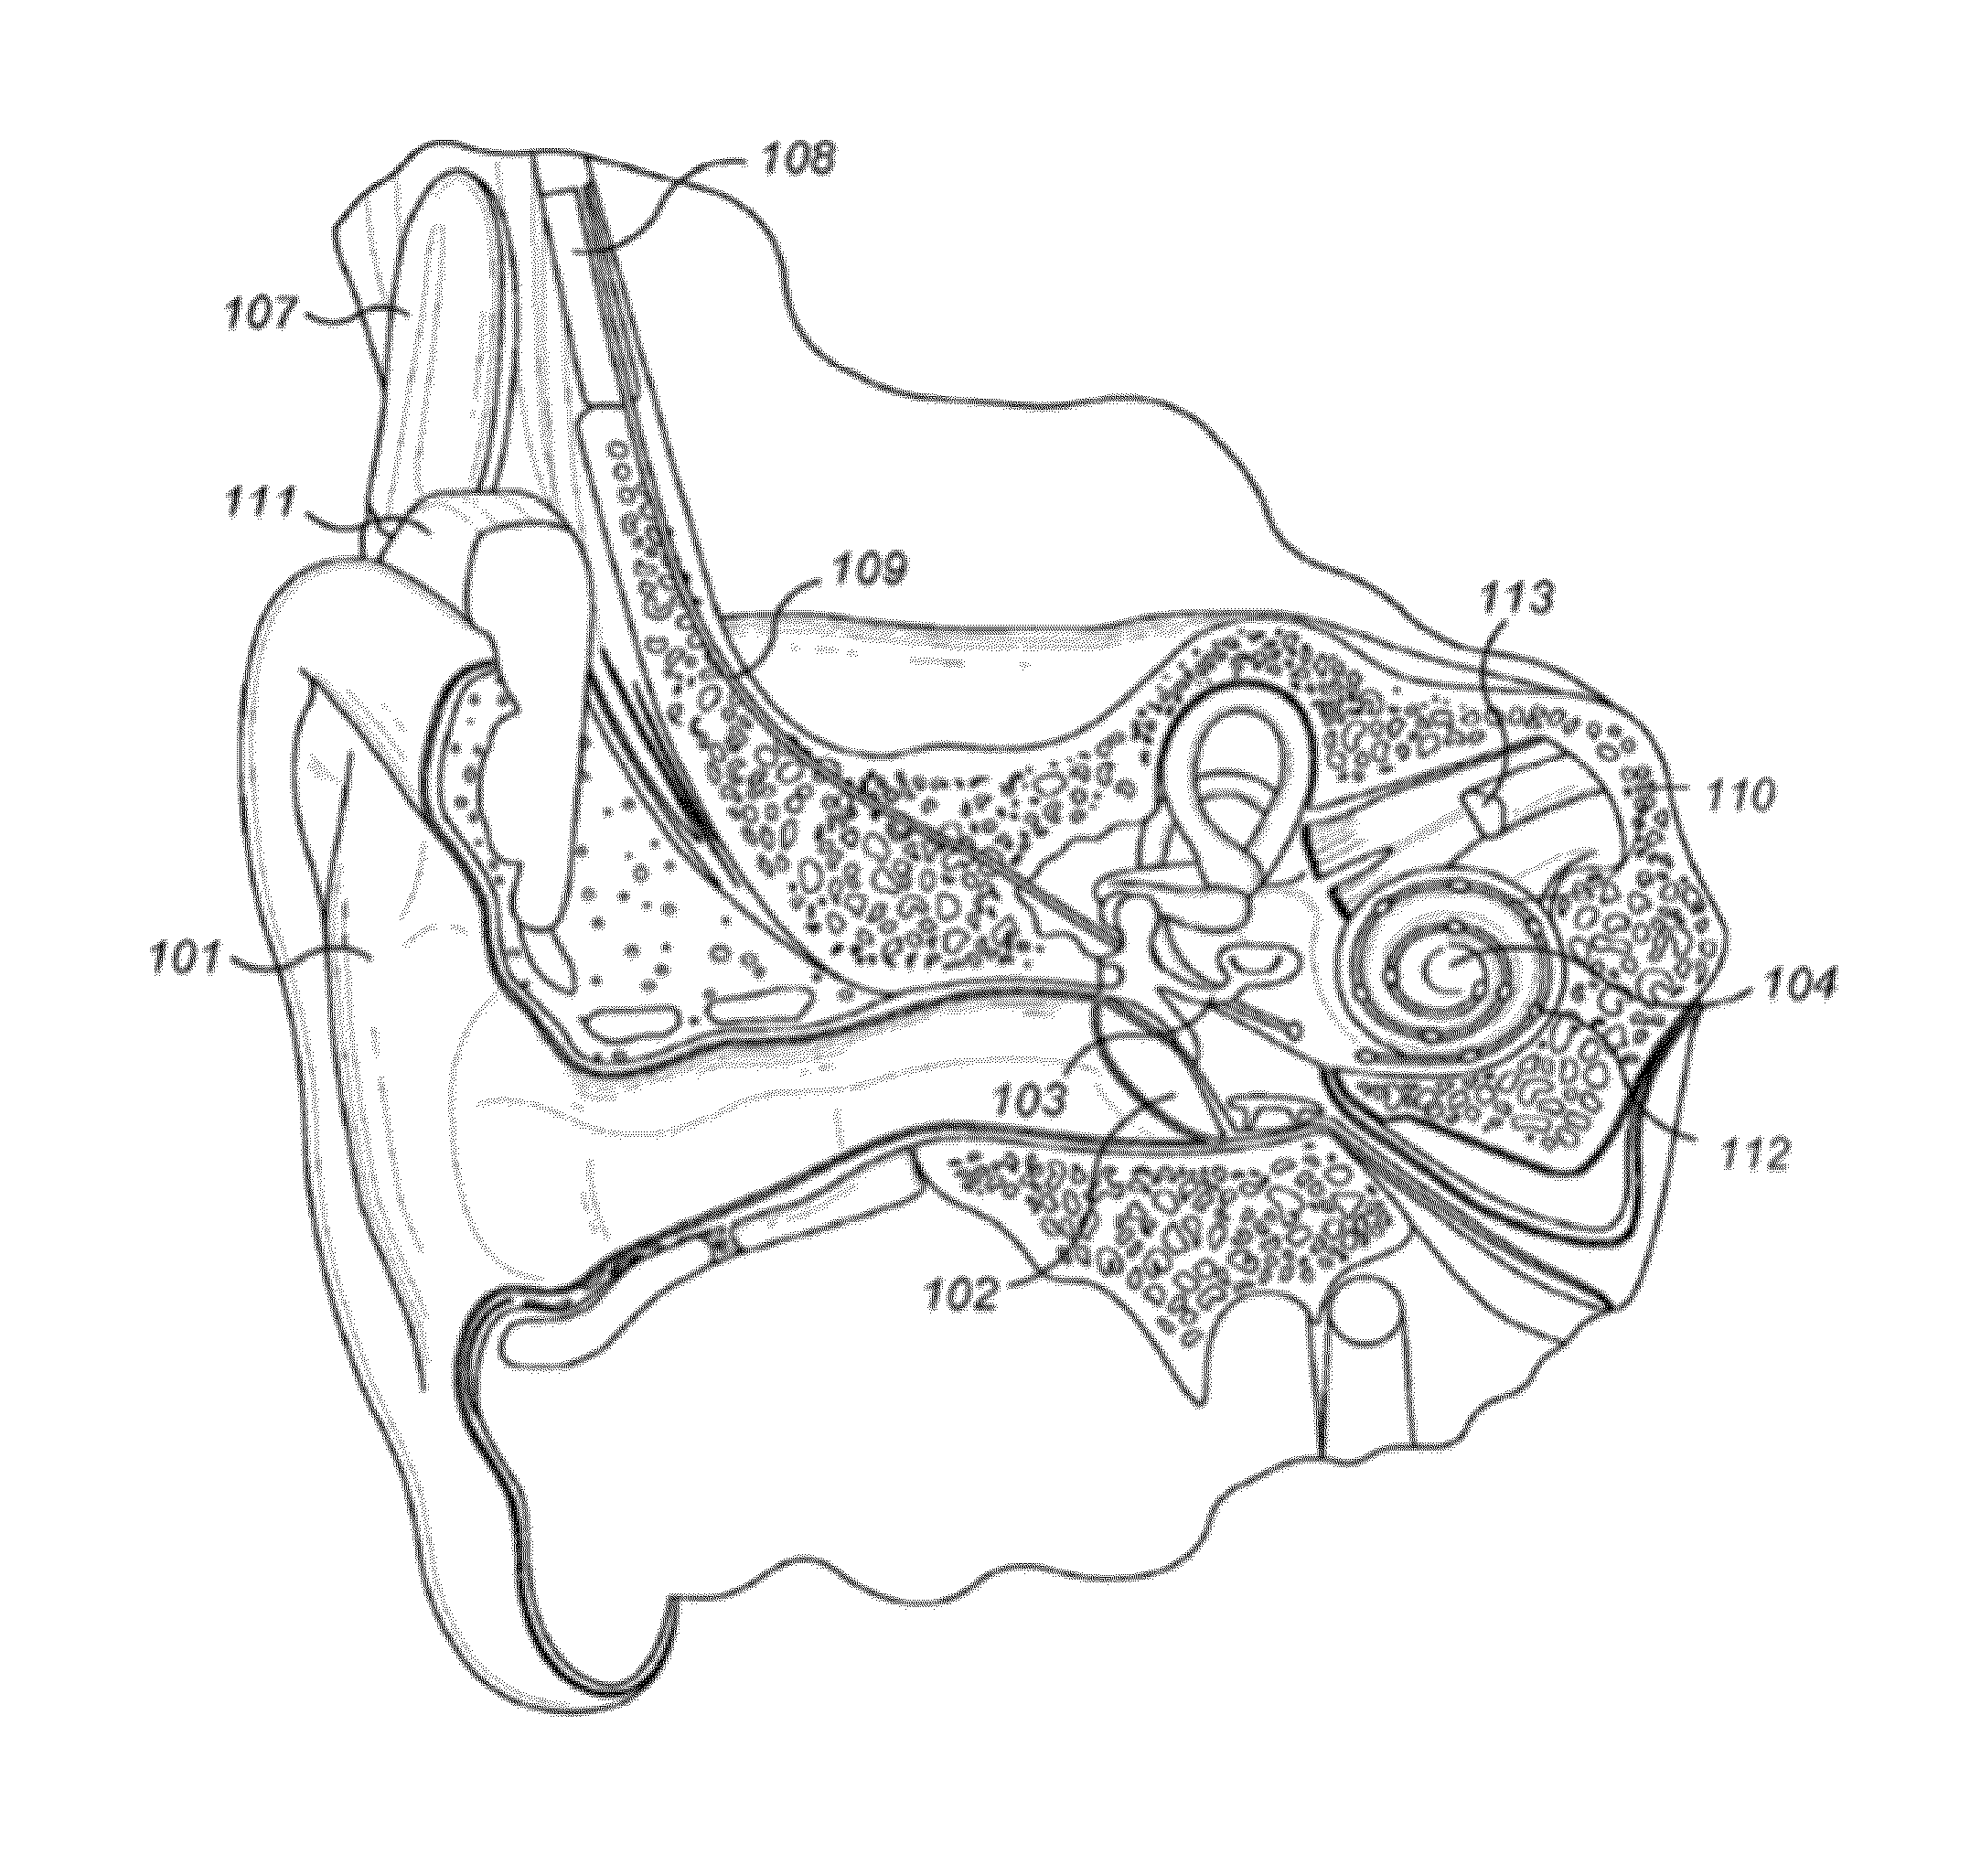 Automatic Selection of Reduction or Enhancement of Transient Sounds